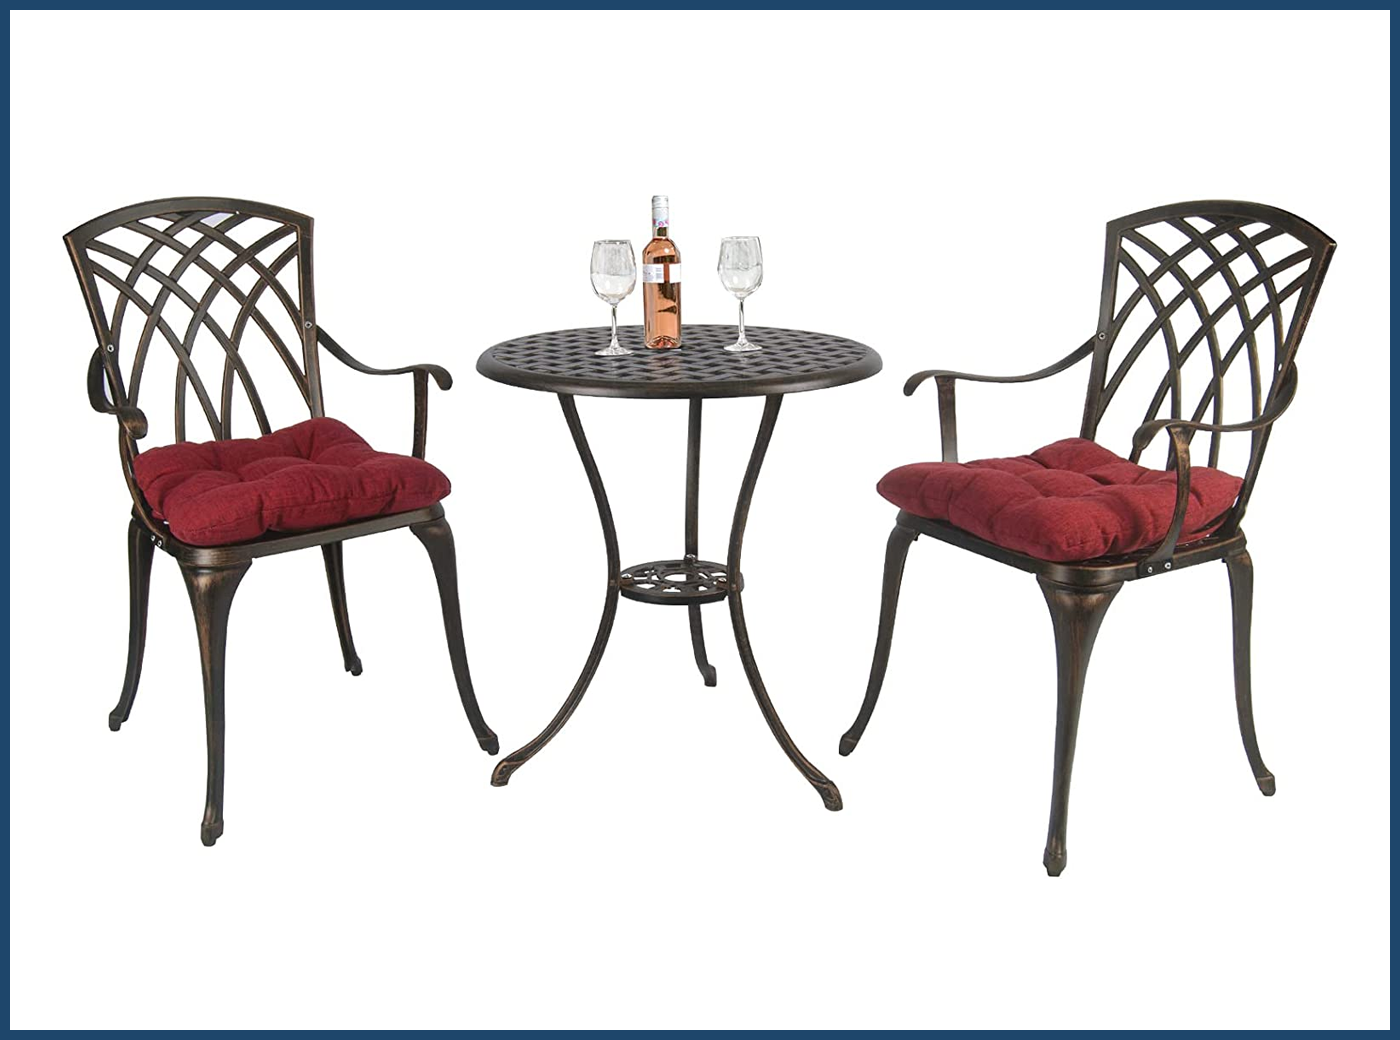 Cast Aluminum 3-Piece Outdoor Table and Chair Set with Umbrella Hole